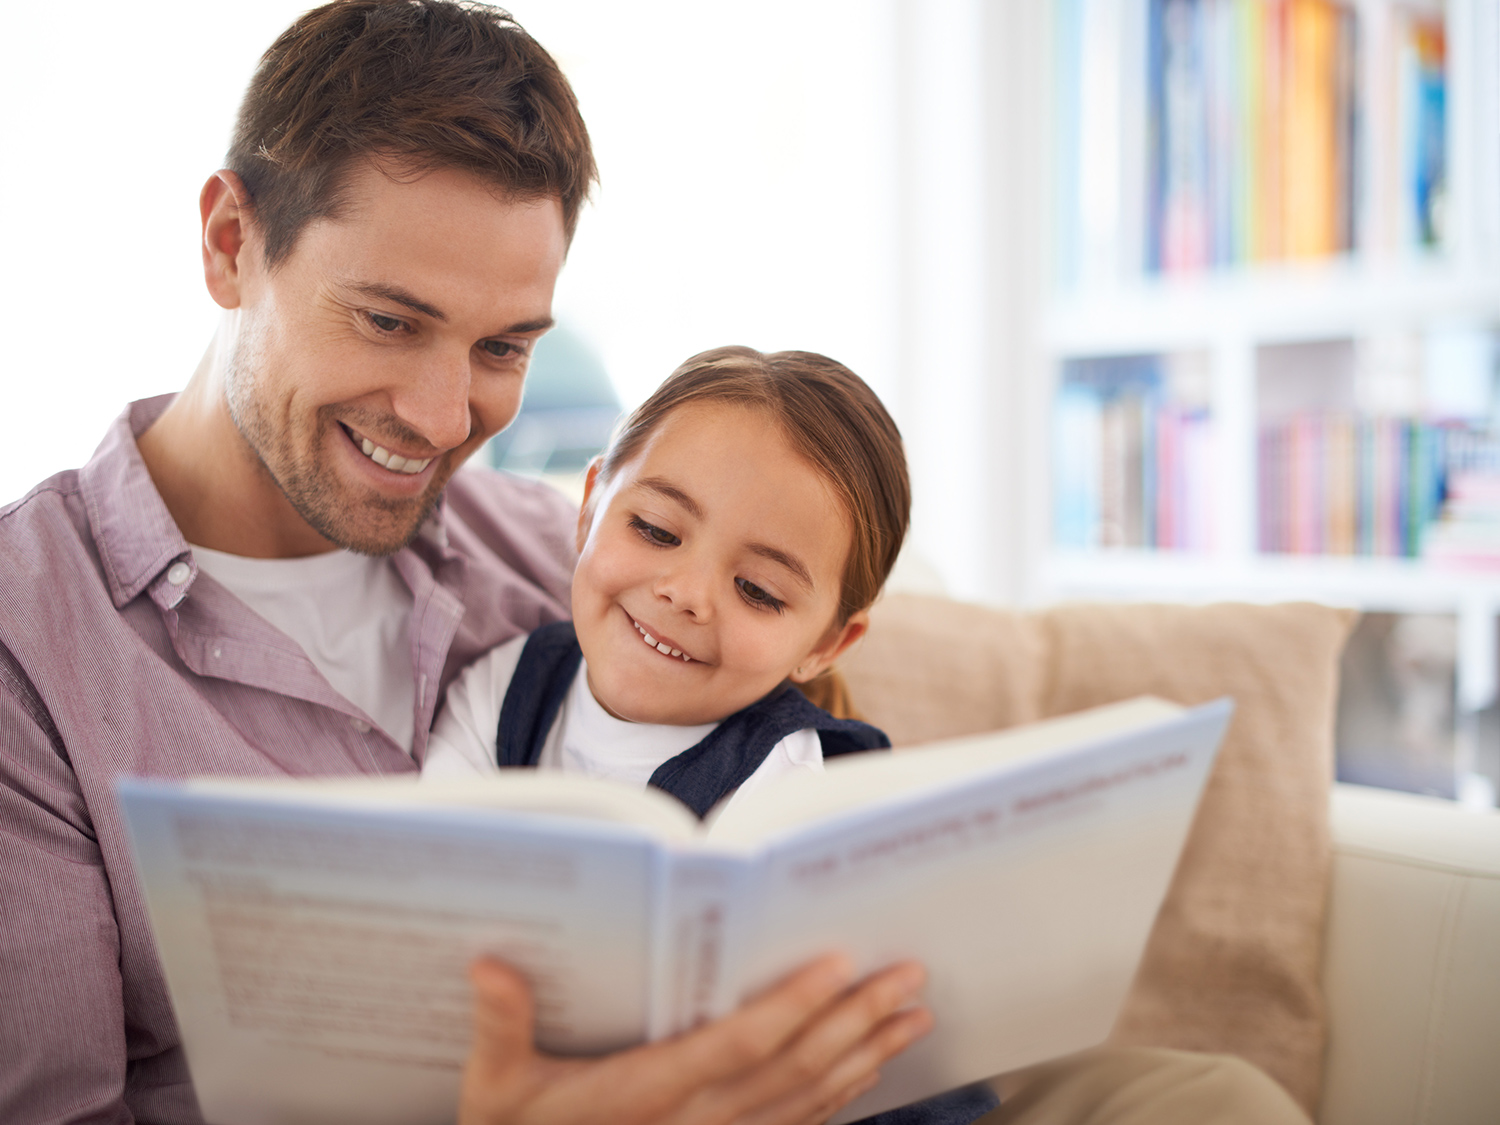 5 Reading Tips for Parents to Keep Kids Engaged